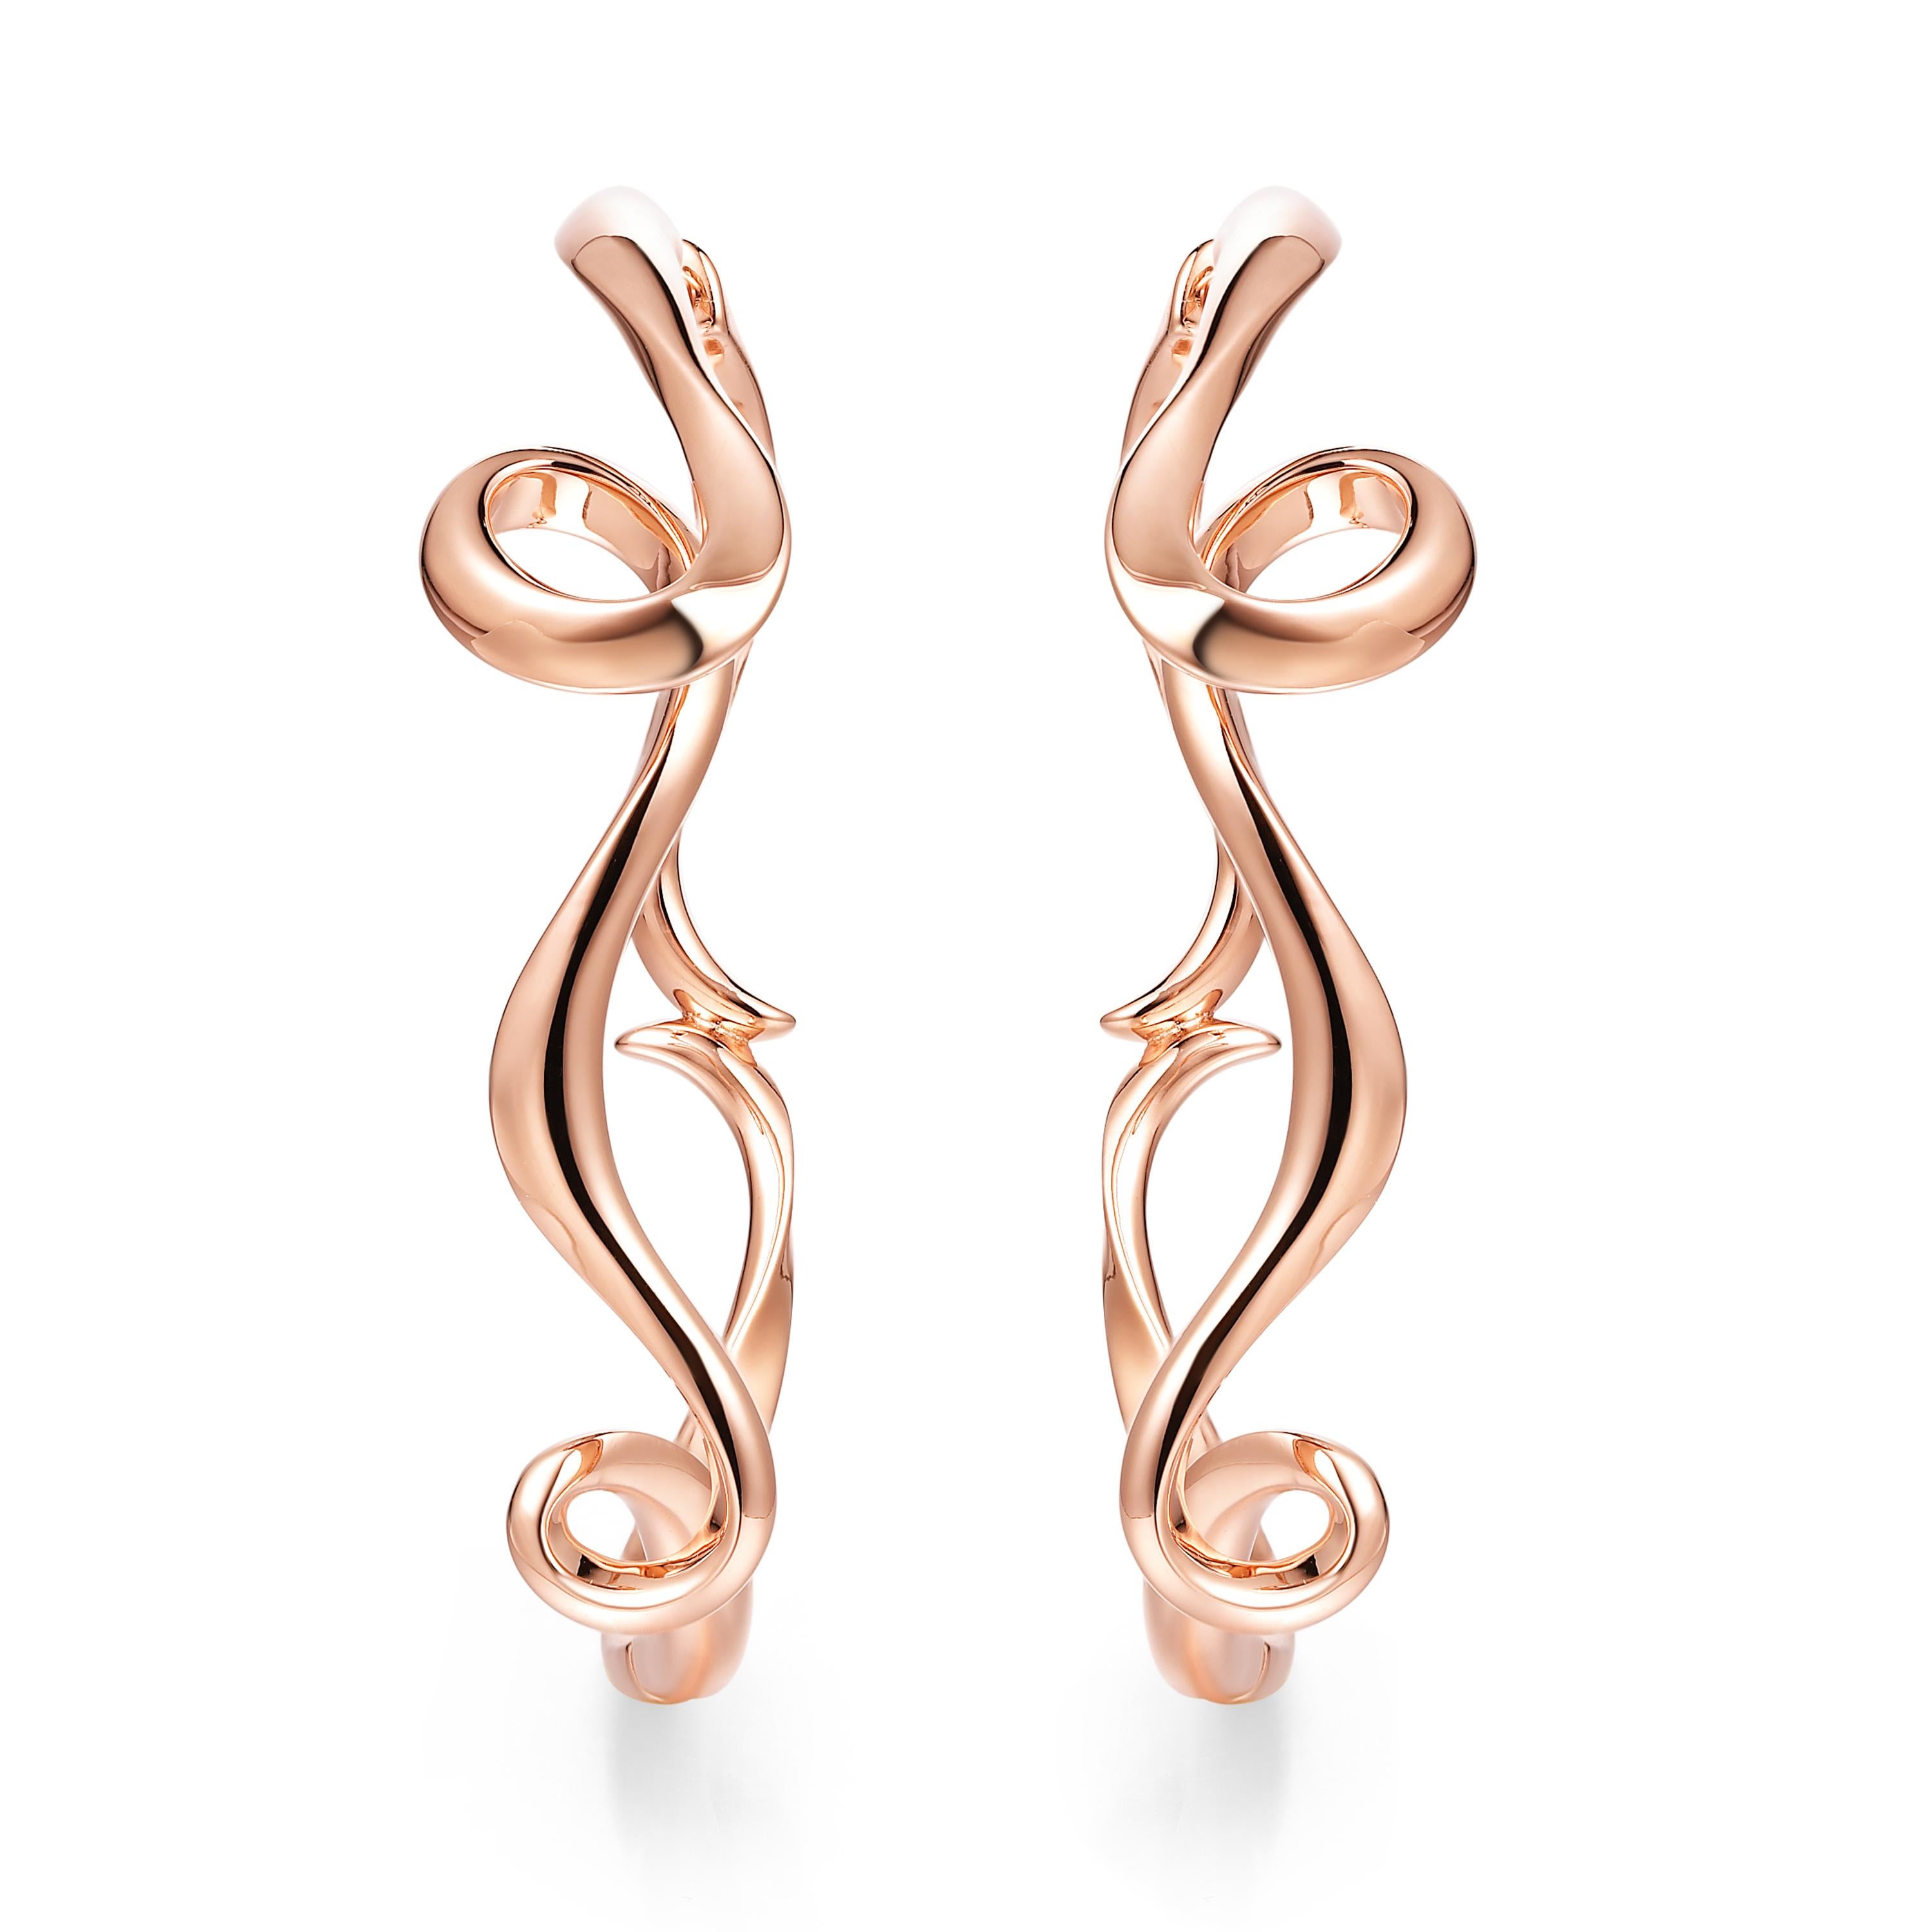 Description:
Serenity large hoop earrings in 18ct rose gold plated on sterling silver.

Inspiration:
Serenity is a collection in sterling silver, inspired by the flow and curves of the smoke of incense. Promoting a calm and peaceful environment,